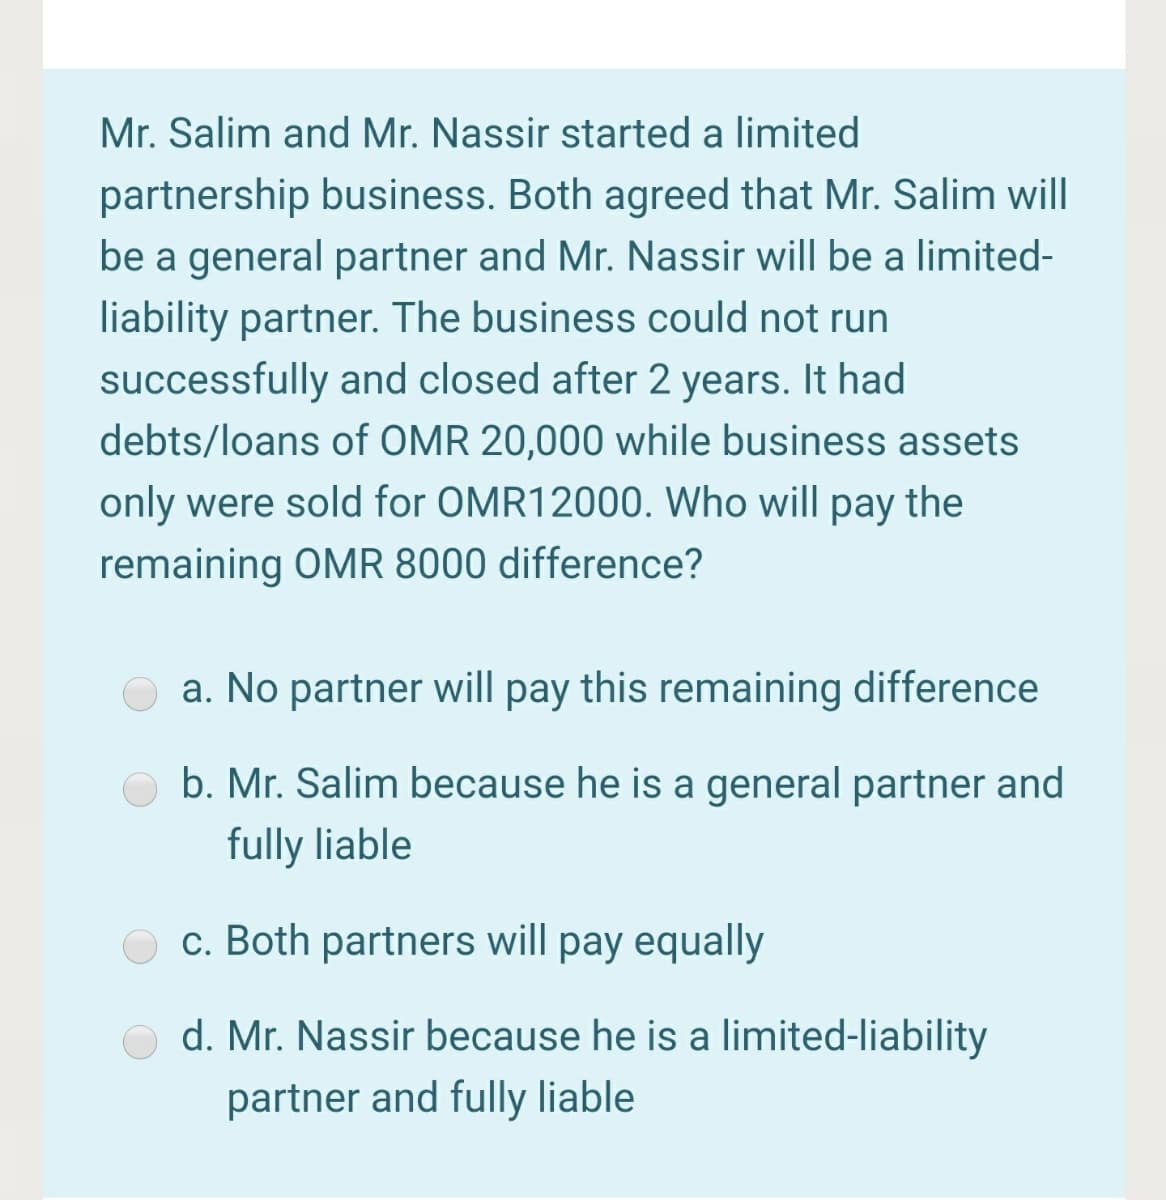 Mr. Salim and Mr. Nassir started a limited
partnership business. Both agreed that Mr. Salim will
be a general partner and Mr. Nassir will be a limited-
liability partner. The business could not run
successfully and closed after 2 years. It had
debts/loans of OMR 20,000 while business assets
only were sold for OMR12000. Who will pay the
remaining OMR 8000 difference?
a. No partner will pay this remaining difference
b. Mr. Salim because he is a general partner and
fully liable
c. Both partners will pay equally
d. Mr. Nassir because he is a limited-liability
partner and fully liable
